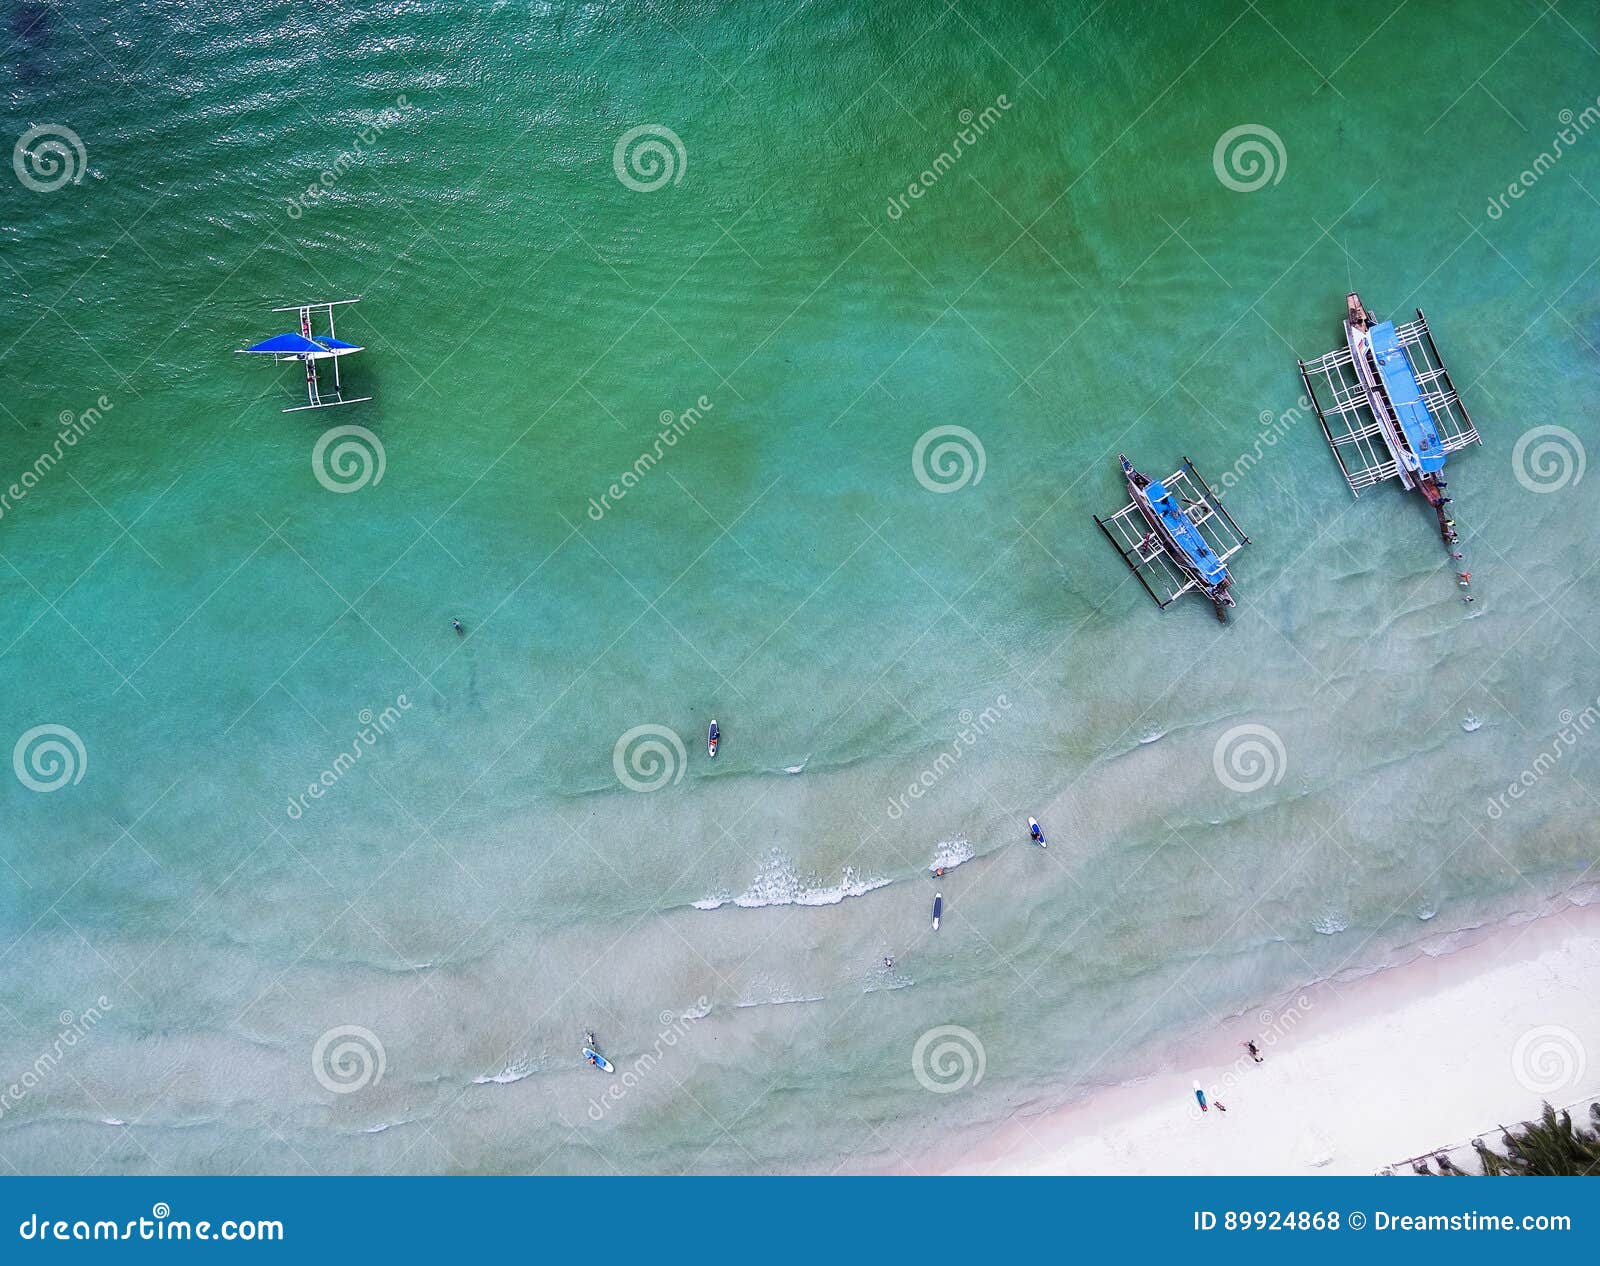 top view small beach with vacationing people, banca boats and pa